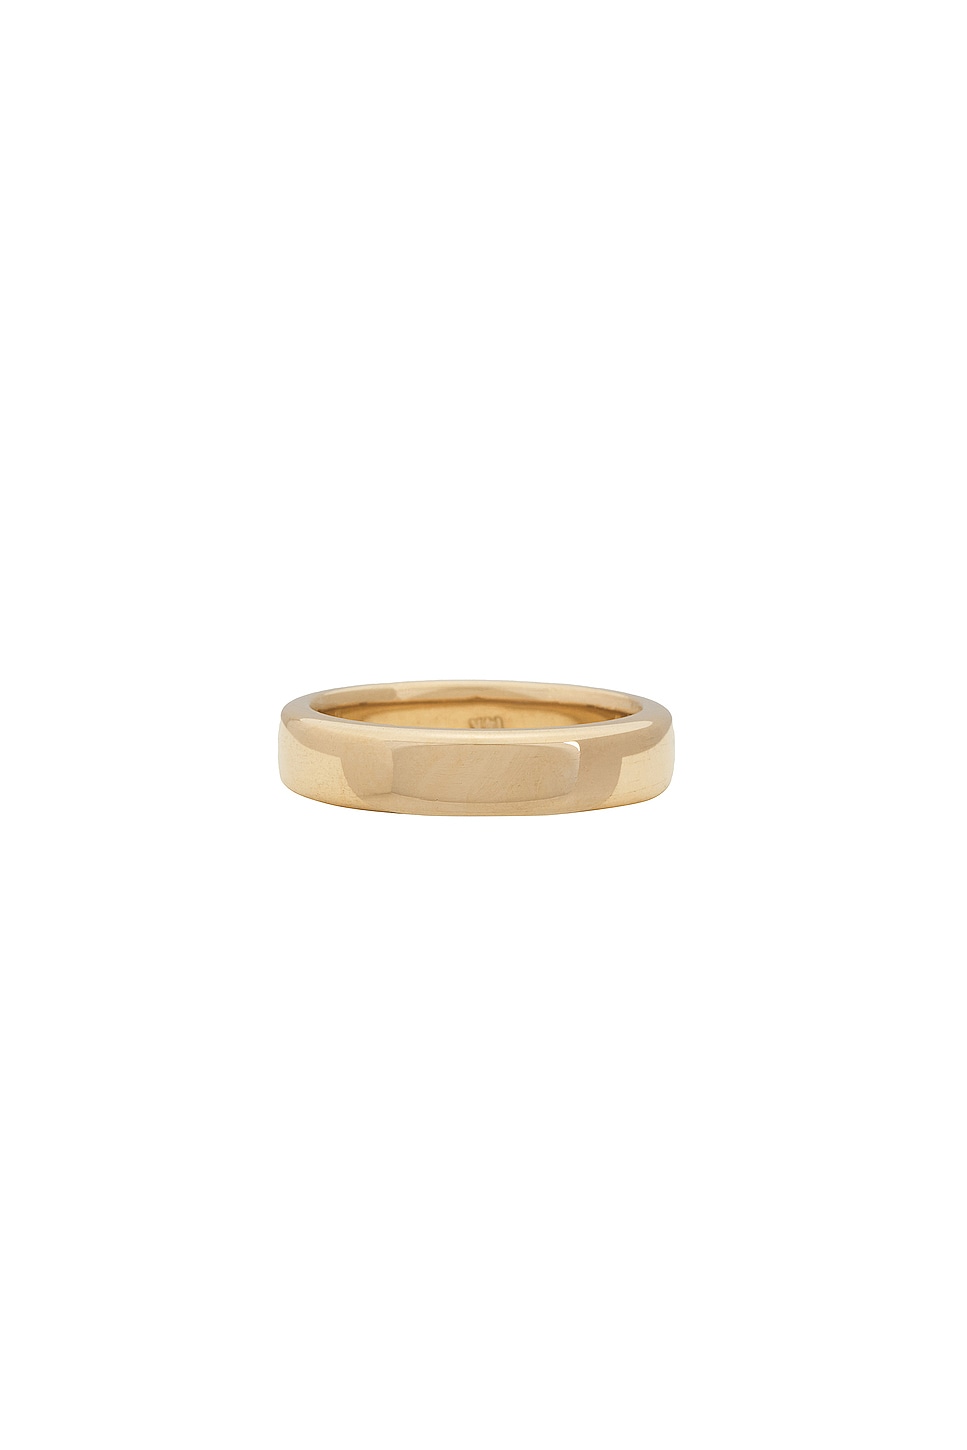 Image 1 of Greg Yuna Classic Band Ring in Gold